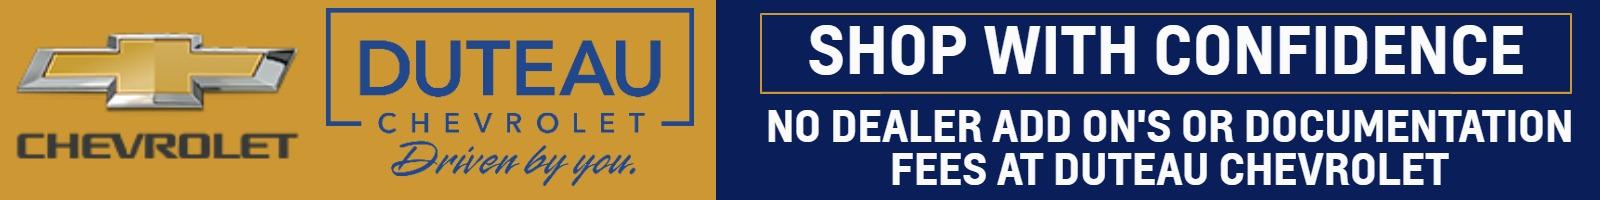 Shop with Confidence. 
NO DEALER ADD ON'S OR DOCUMENTATION FEES AT DUTEAU CHEVROLET